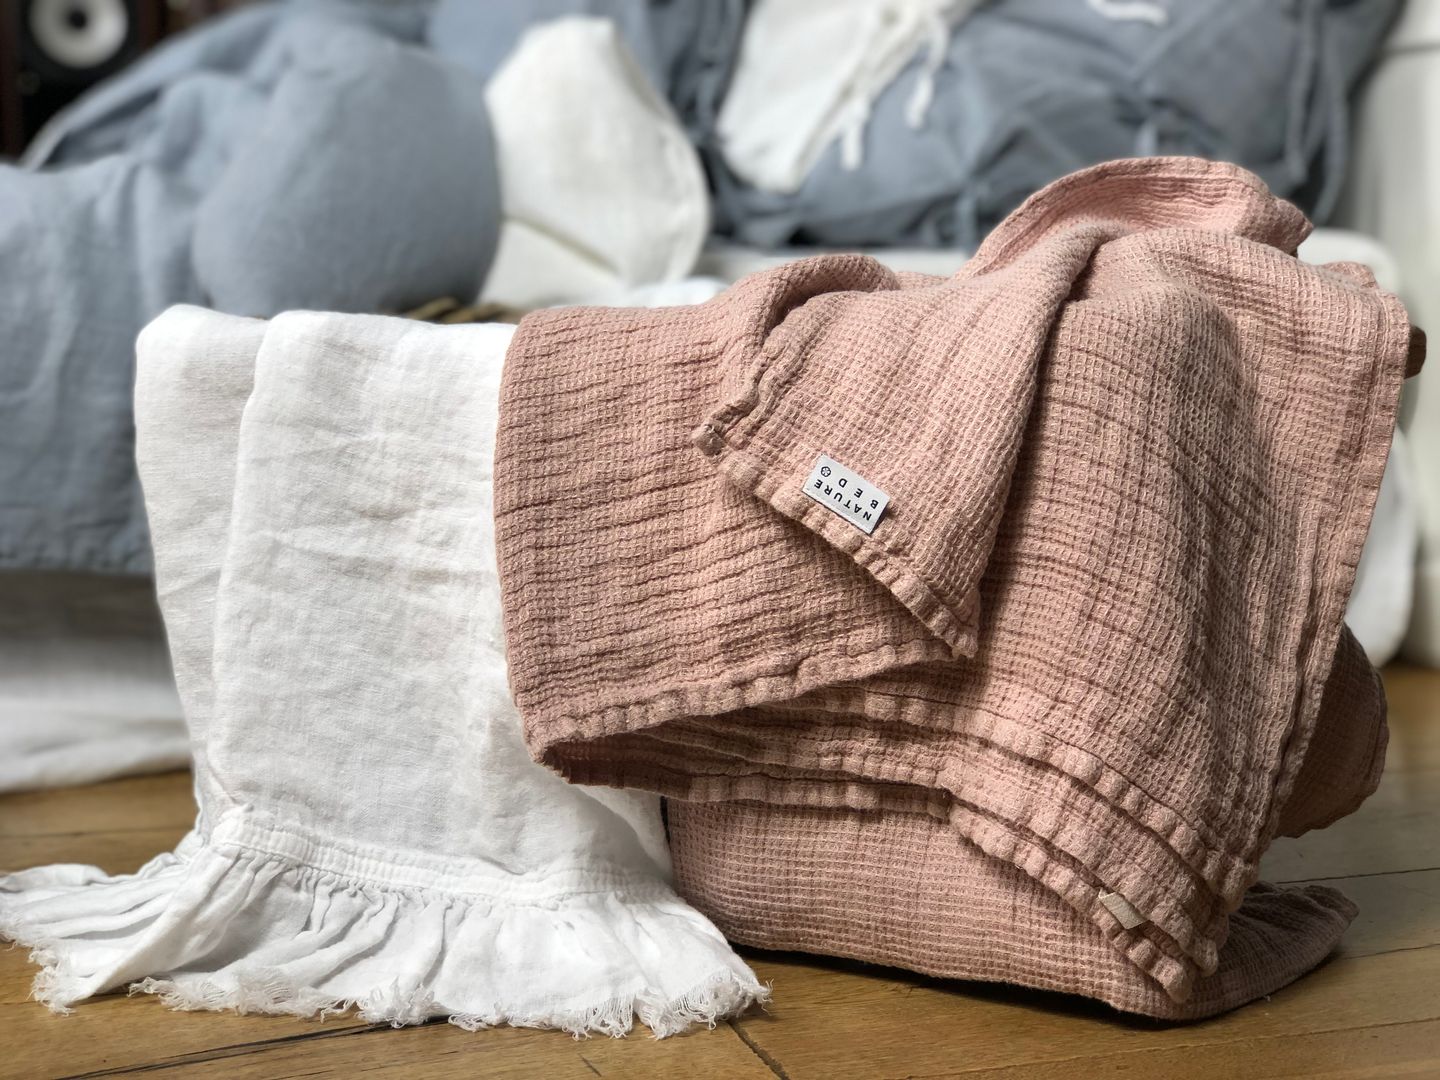 Len w lazience, NatureBed NatureBed Rustic style bathroom Flax/Linen Pink Textiles & accessories